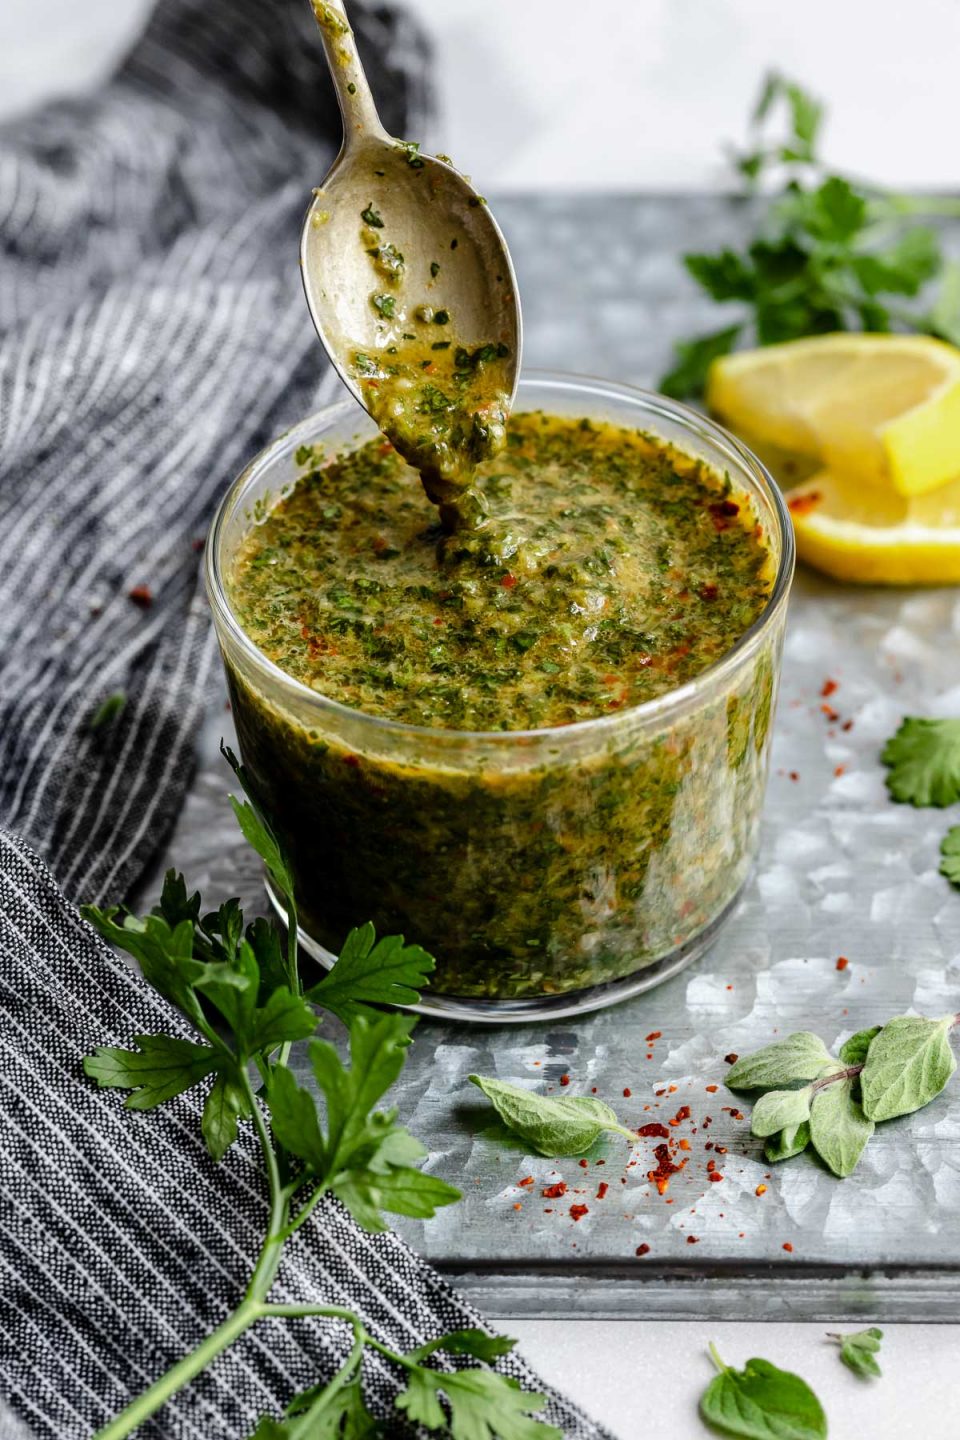 An angled shot of a jar of Chimichurri sauce that sits on a dark gray surface. A spoon has been dipped into the sauce & is being lifted out of the jar with sauce dripping from it. The jar is surrounded by fresh herbs & a slice of lemon.